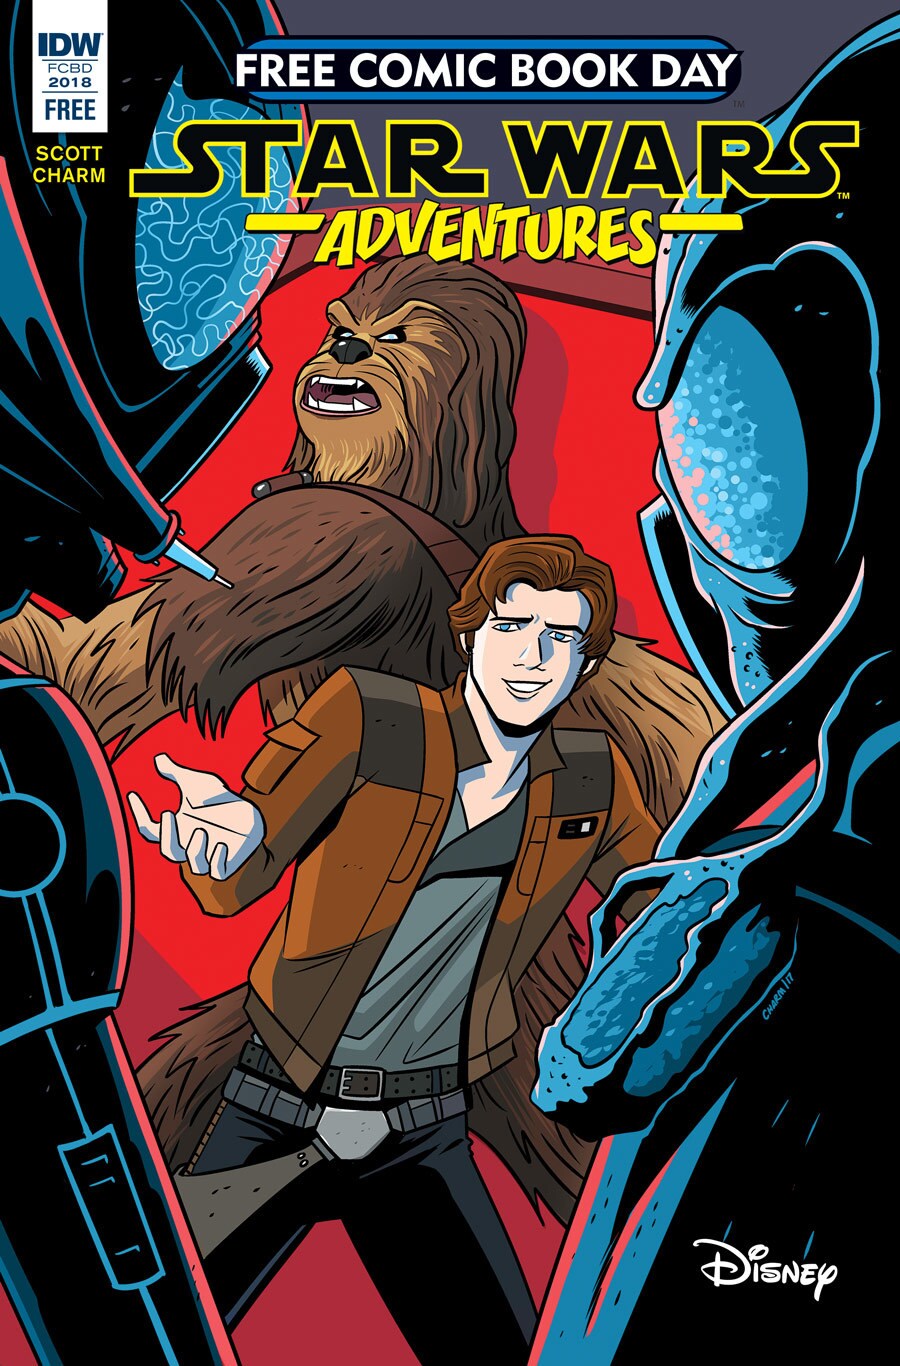 The Star Wars Adventures Free Comic Book Day 2018 cover, which features Han and Chewbacca cornered by two bounty hunters.